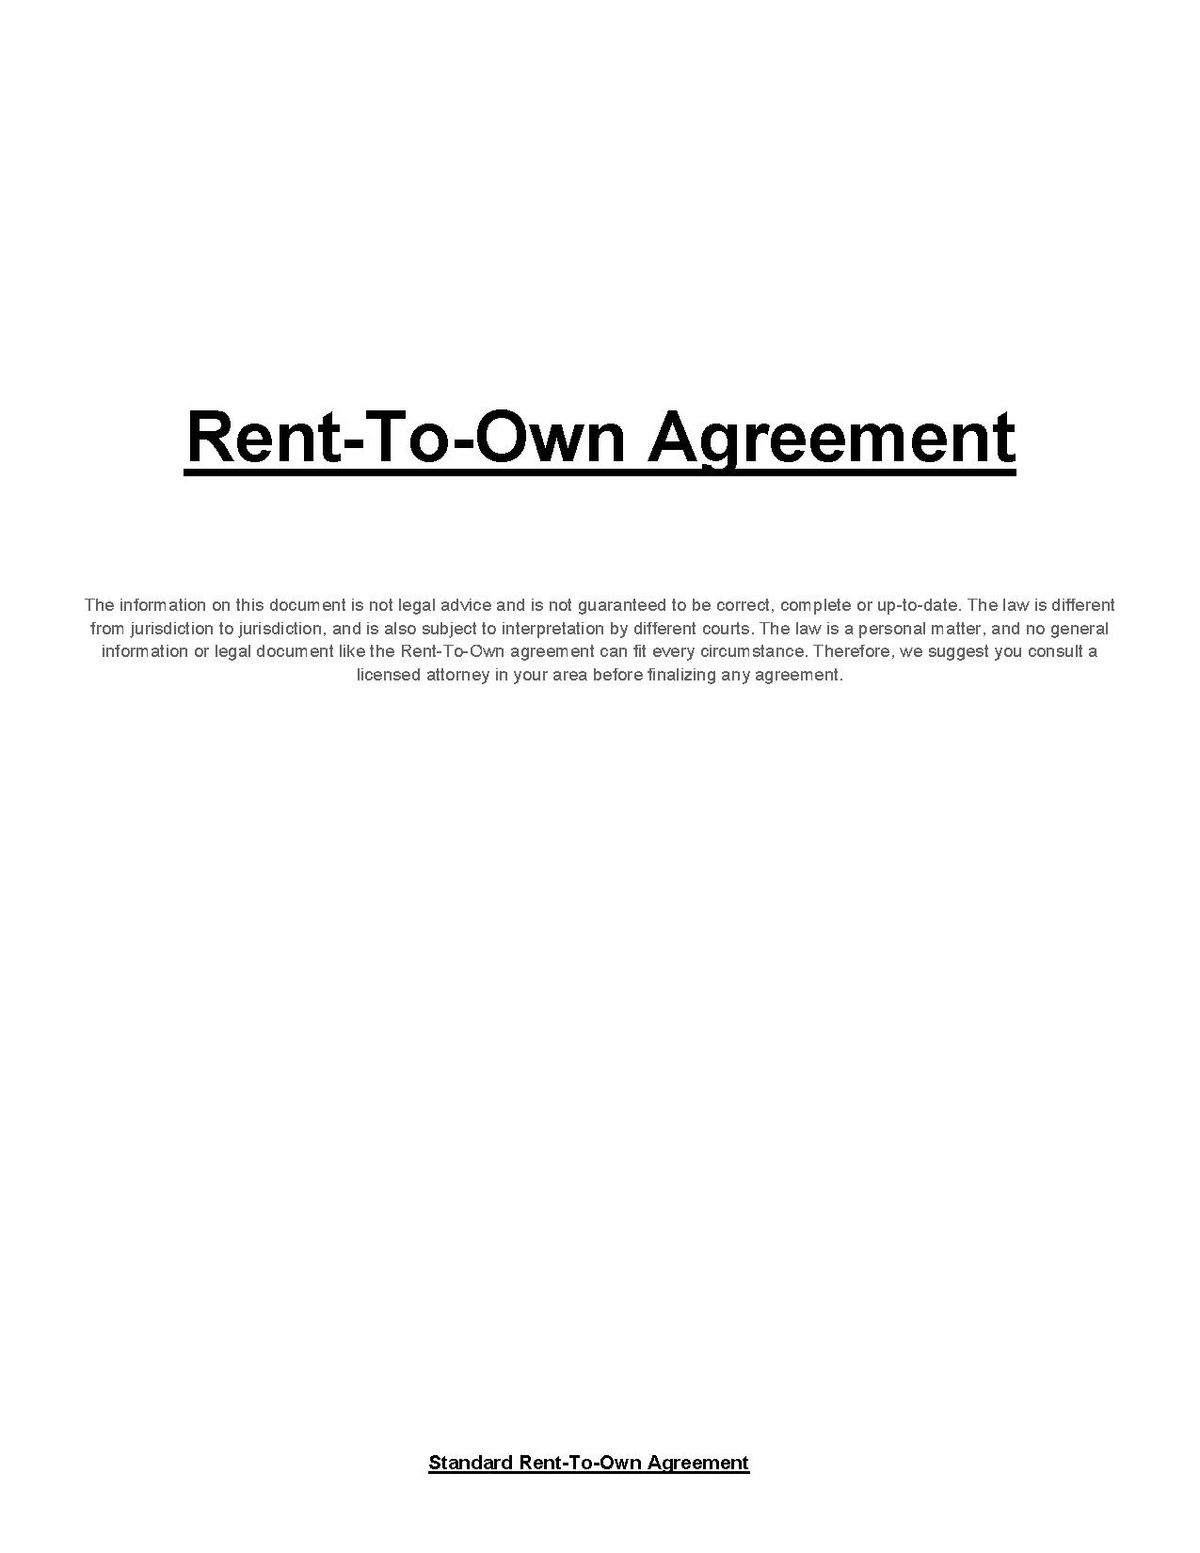 Loan Of Equipment Agreement Rent To Own Wikipedia